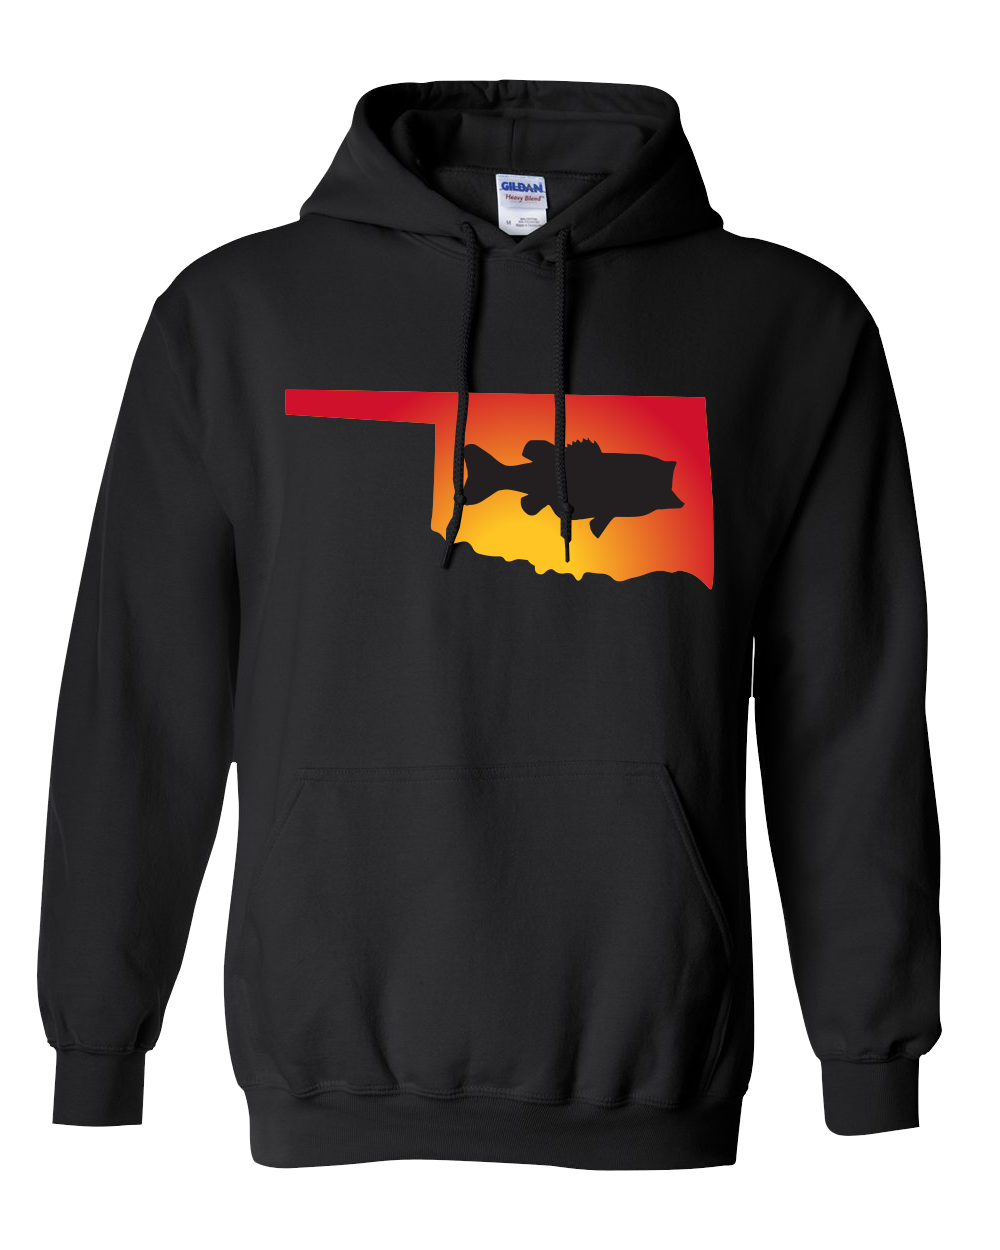 Pullover Hooded Sweatshirt Oklahoma Black Large Mouth Bass Vibrant Design High Quality Tight Knit Ring Spun Low Maintenance Cotton Printed With The Newest Available Color Transfer Technology